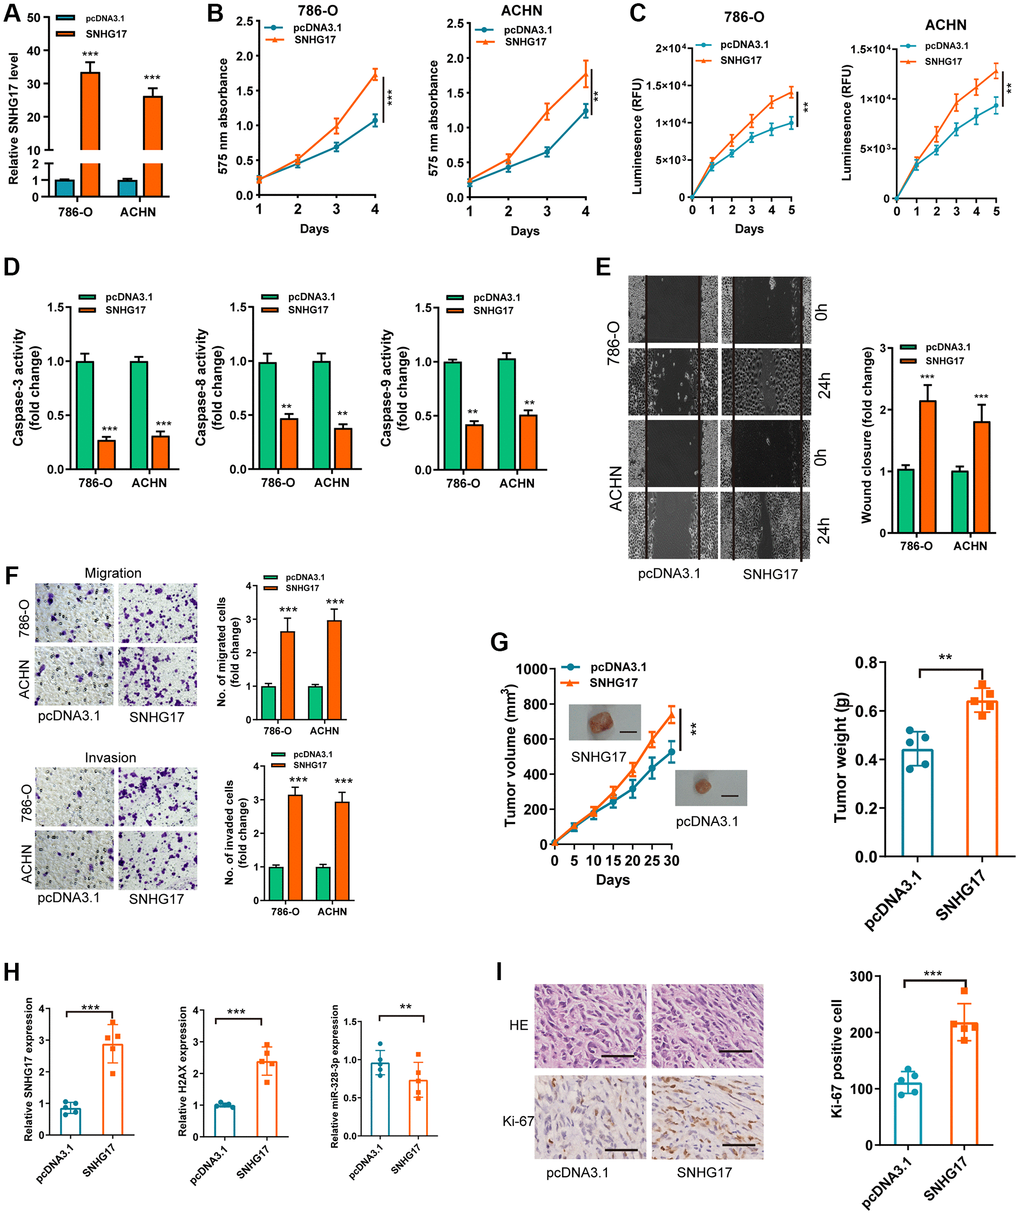 Upregulation of SNHG17 drives malignant phenotype of RCC. (A) qRT-PCR assay analysis of the expression of SNHG17 in 786-O and ACHN cell lines transfection with pcDNA3.1/SNHG17 or pcDNA3.1. (B–C) CCK-8 assay (B) and Cell Titer-Glo Luminescent cell viability assay (C) analysis of the proliferative ability of 786-O and ACHN cells transfected with the indicated vectors. (D) The activity of caspase-3, -8, and -9 assay analysis of cell apoptosis of786-O and ACHN cells transfected with the indicated vectors. (E) The wound healing assay analysis of cell migration in 786-O and ACHN cell lines transfected with the indicated vectors. (F) The transwell assay analysis of cell migration and invasion in 786-O and ACHN cell lines transfected with the indicated vectors. (G) SNHG17 overexpression remarkably increased the volume and weight of tumor xenograft. Scale bar, 1.0 cm. (H) qRT-PCR assay analysis of expression of SNHG17, H2AX and miR-328-3p in the tumor xenograft. (I) Immunohistochemistry staining of Ki-67 in the tumor xenograft. Scale bar, 200 μm. Data are presented as means ± standard deviation from triplicate experiments. A t-test was used to evaluate the statistical significance as compared to the control. RCC, renal cell carcinoma. *P **P ***P 